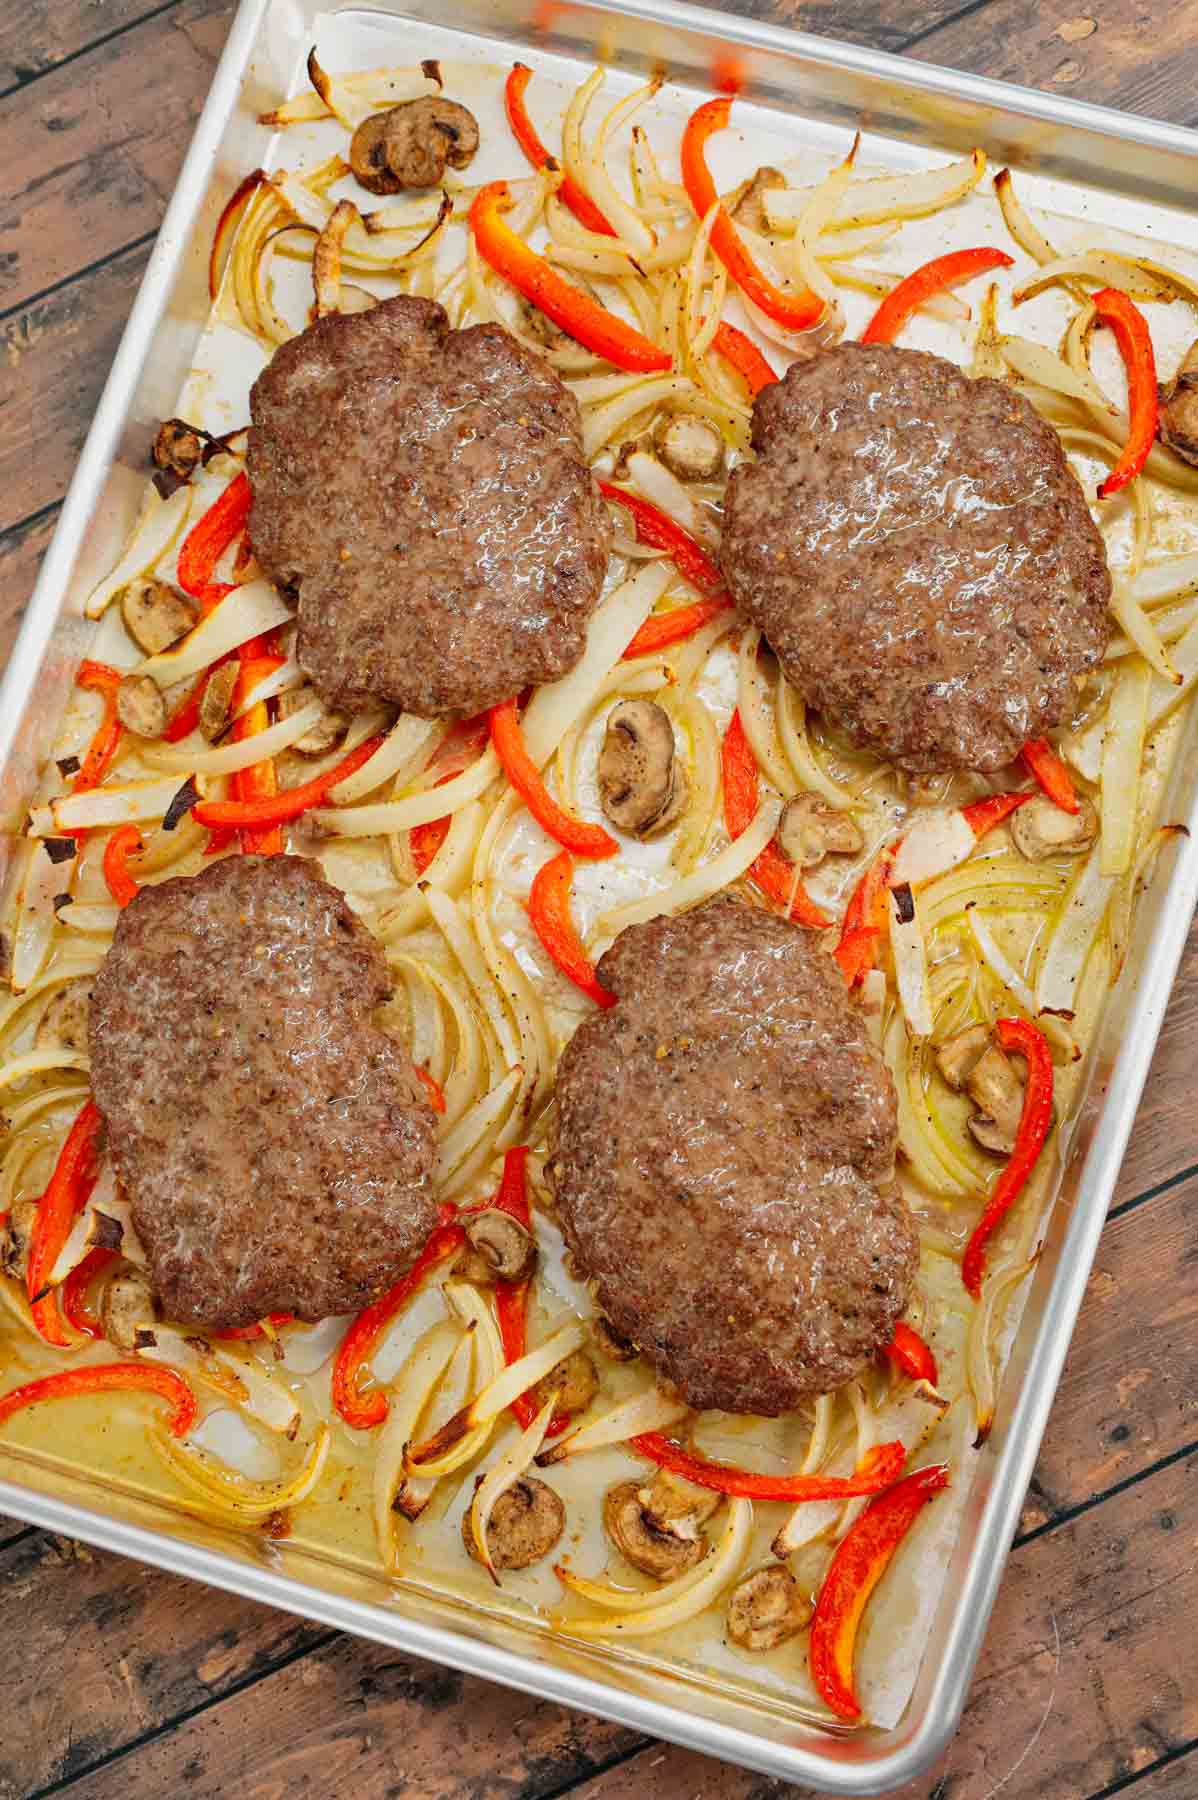 Oven Baked Hamburger Steaks are an easy sheet pan dinner recipe with seasoned ground beef patties cooked along with sliced onions, red bell peppers and mushrooms.